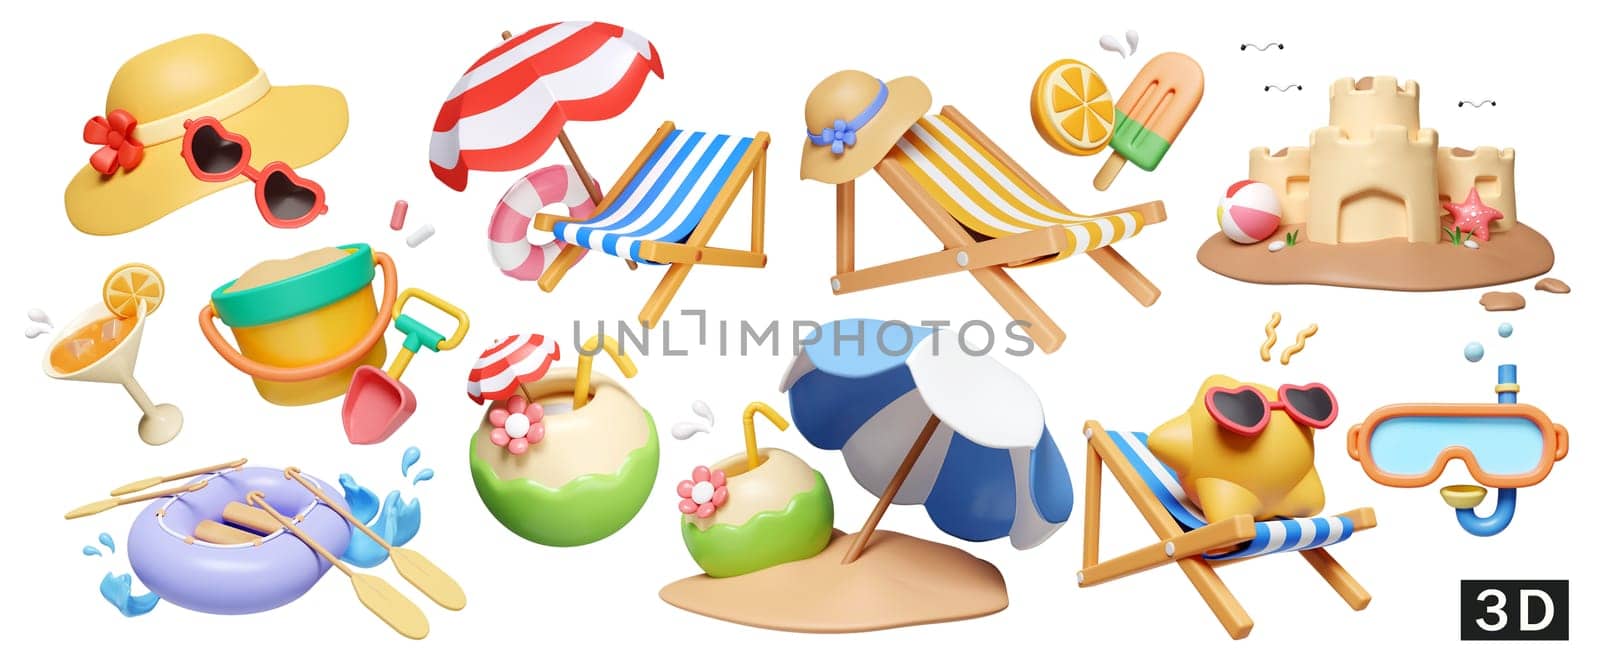 3d render illustration. a large collection of icons on the theme of summer for outdoor trip vacation isolated in white background design..